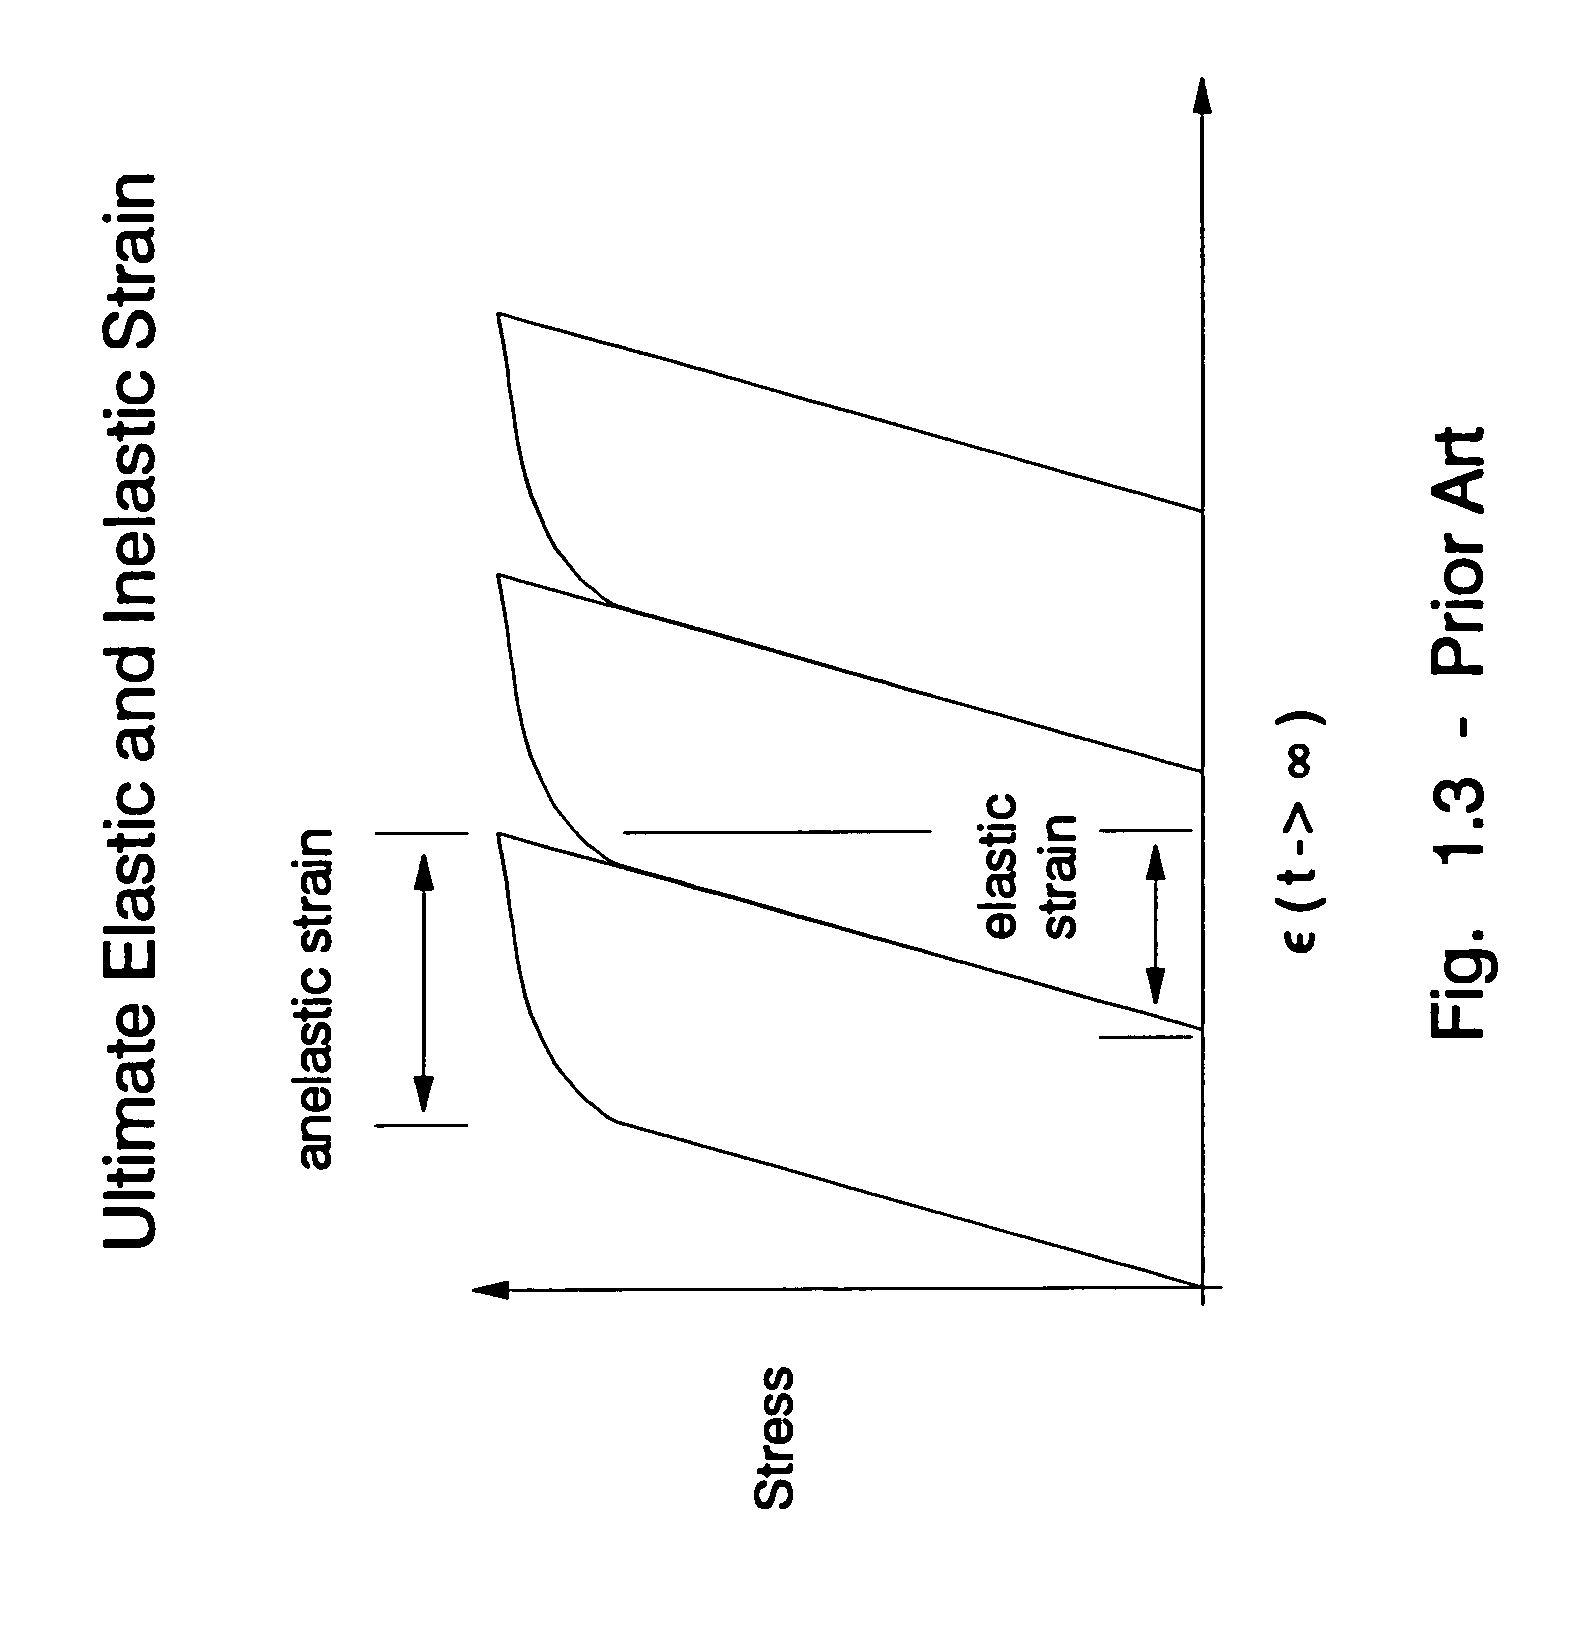 Method of multi-dimensional analysis of viscoelastic materials for stress, strain, and deformation